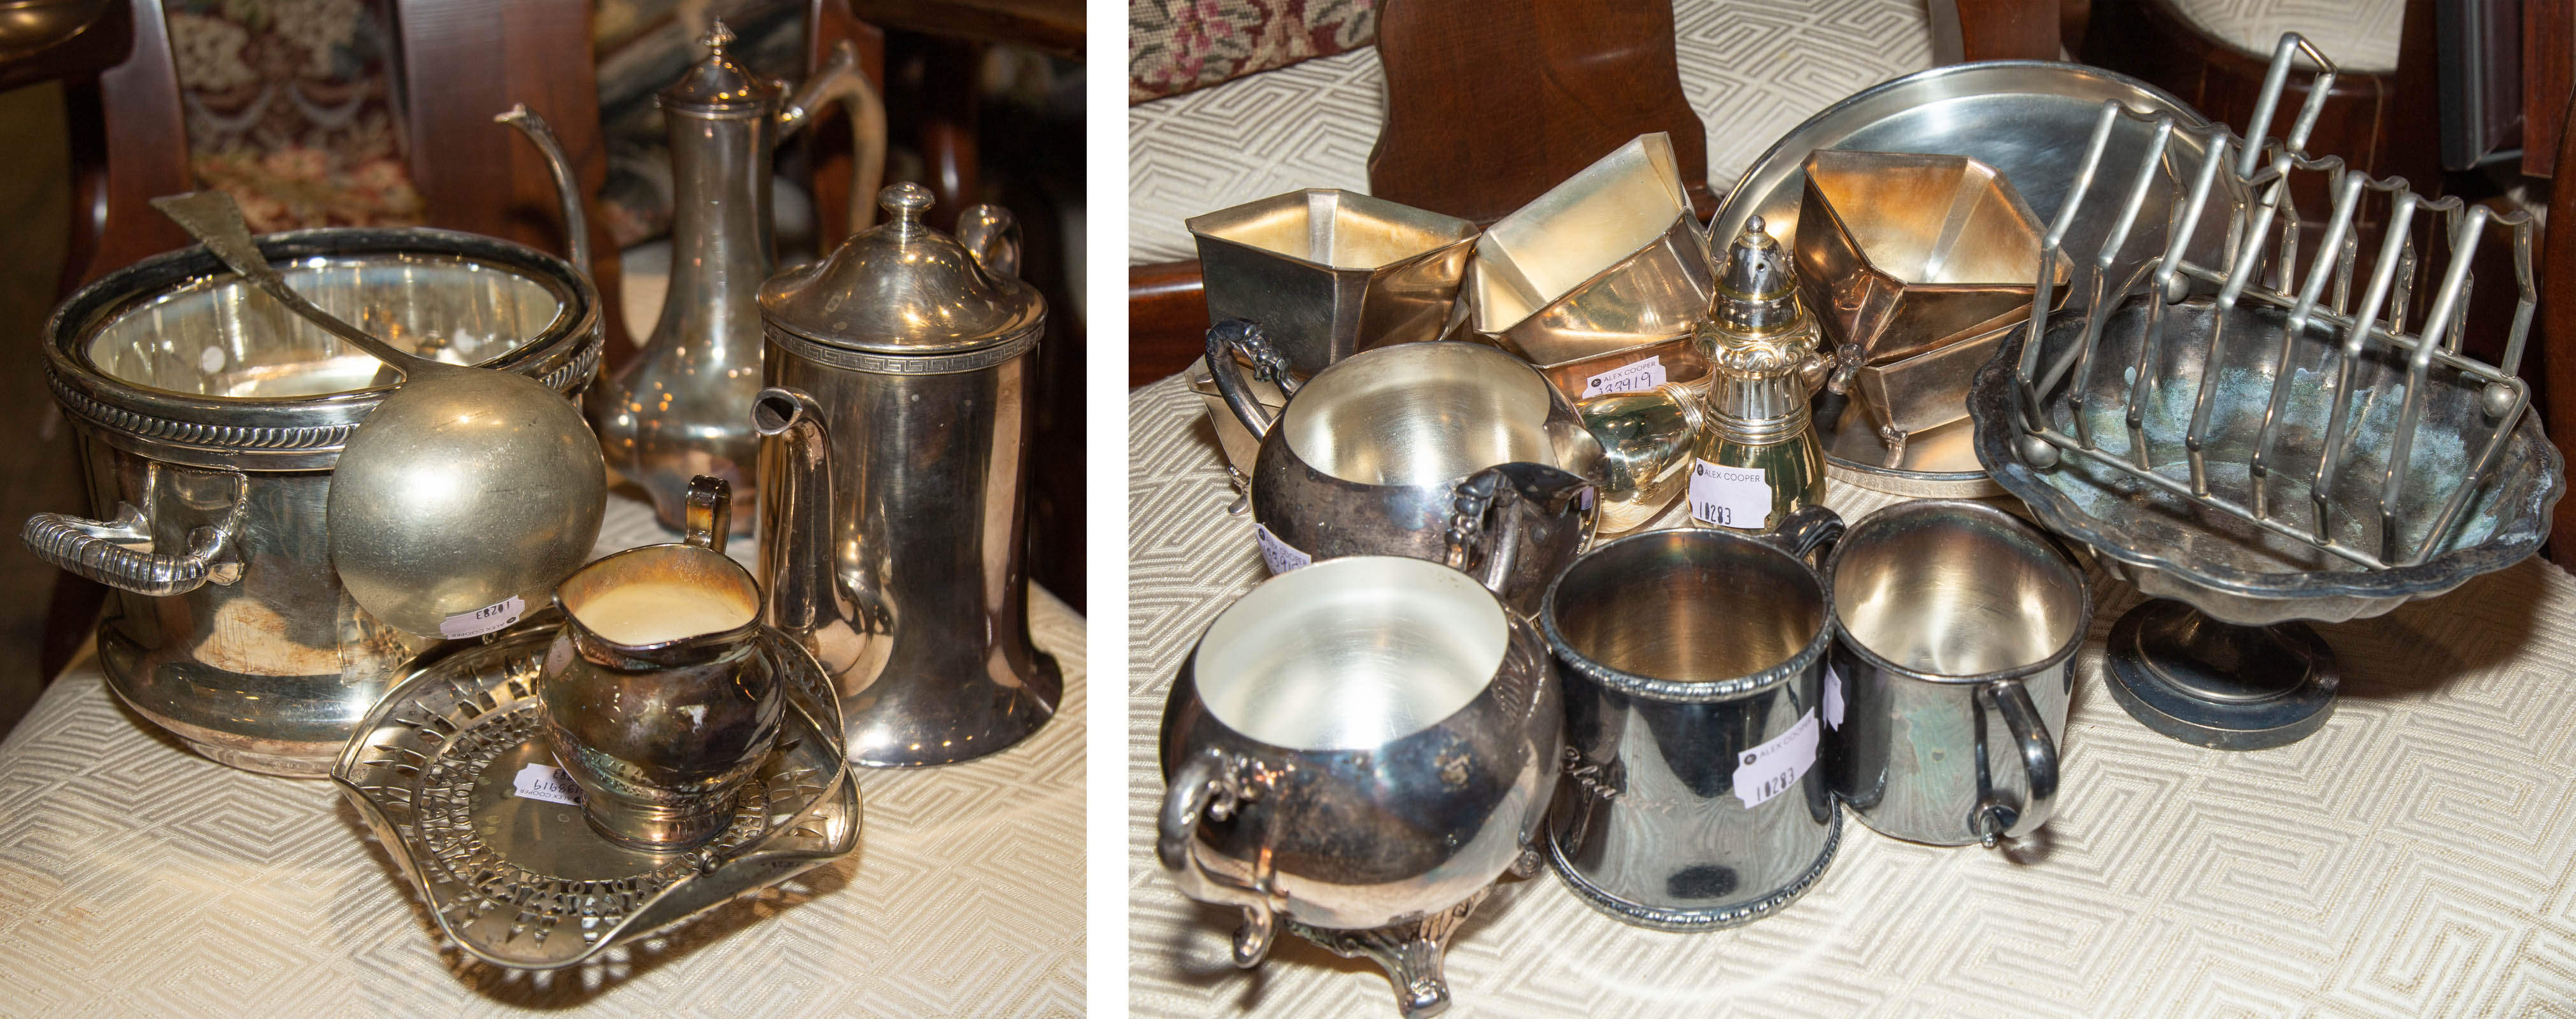 GROUP OF SILVER PLATED HOLLOWWARE 289c78